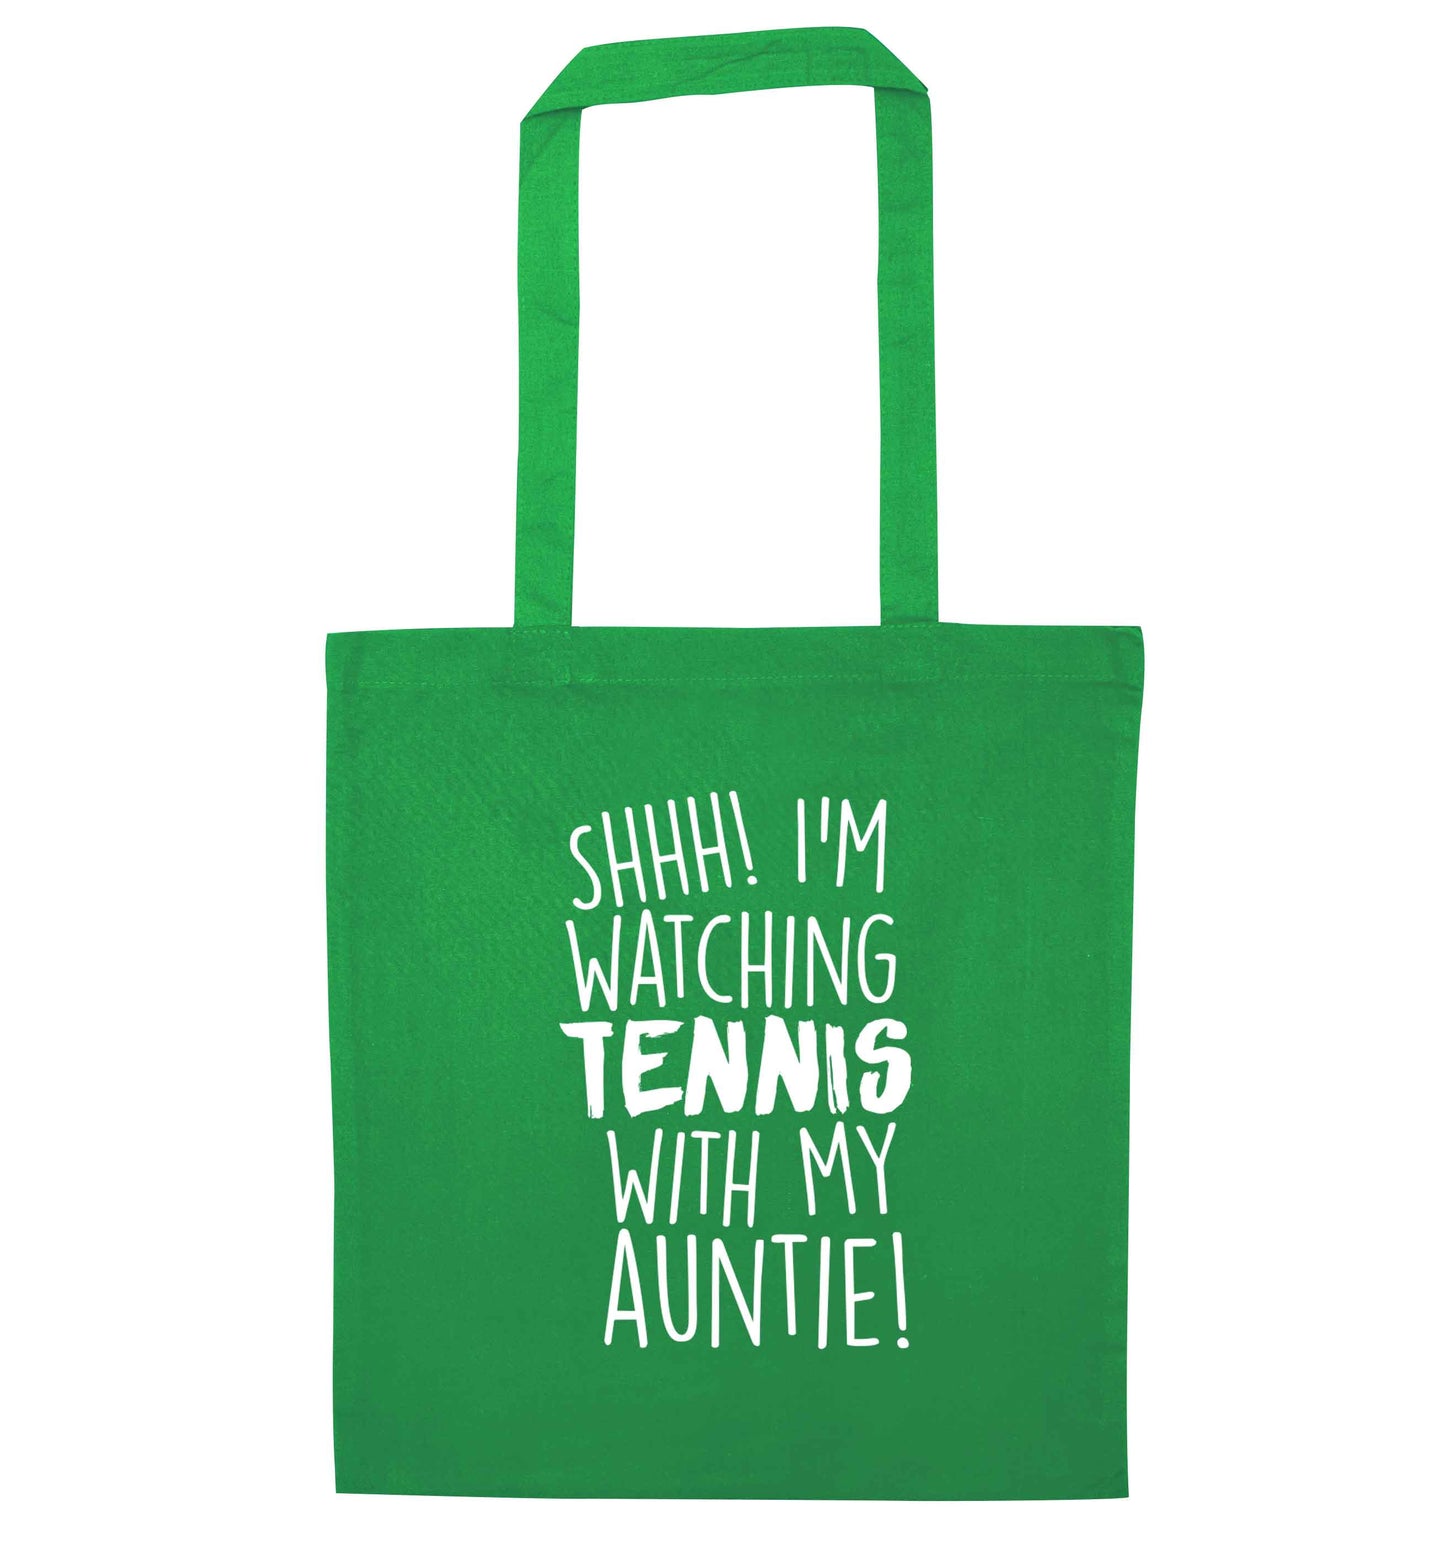 Shh! I'm watching tennis with my auntie! green tote bag